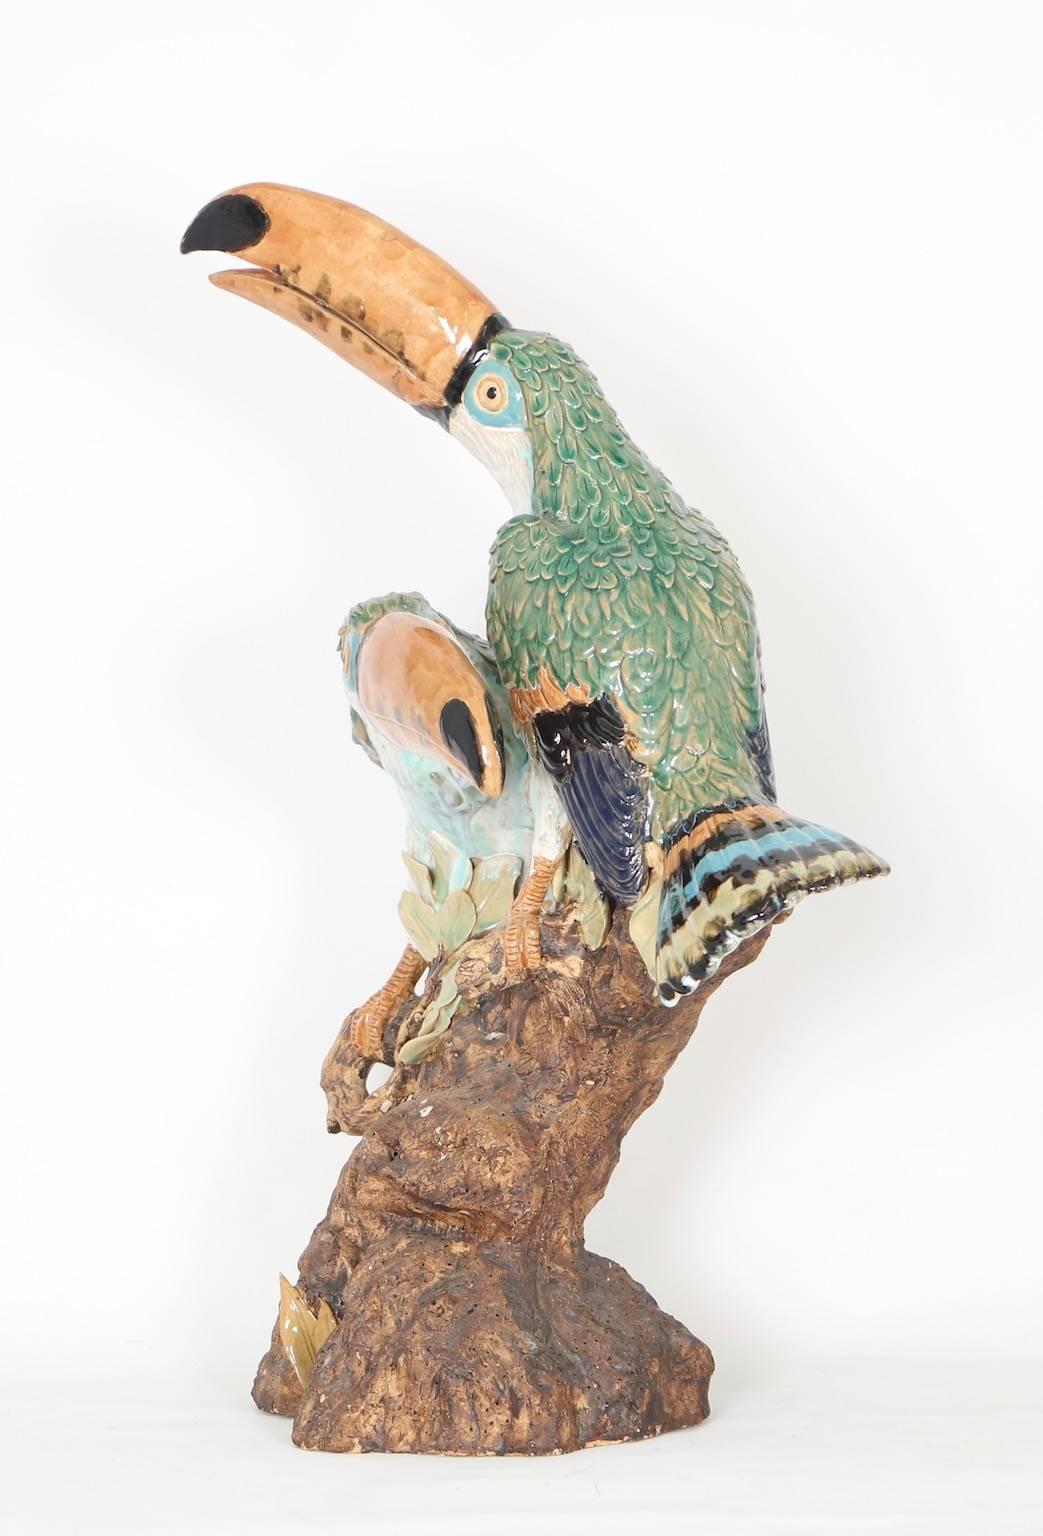 Two life-sized toucans depicted perching on a tree branch in this Italian majolica sculpture. This piece is in the style of Minton naturalistic fauna that was created in the late 19th century.

This item is in excellent vintage condition and has